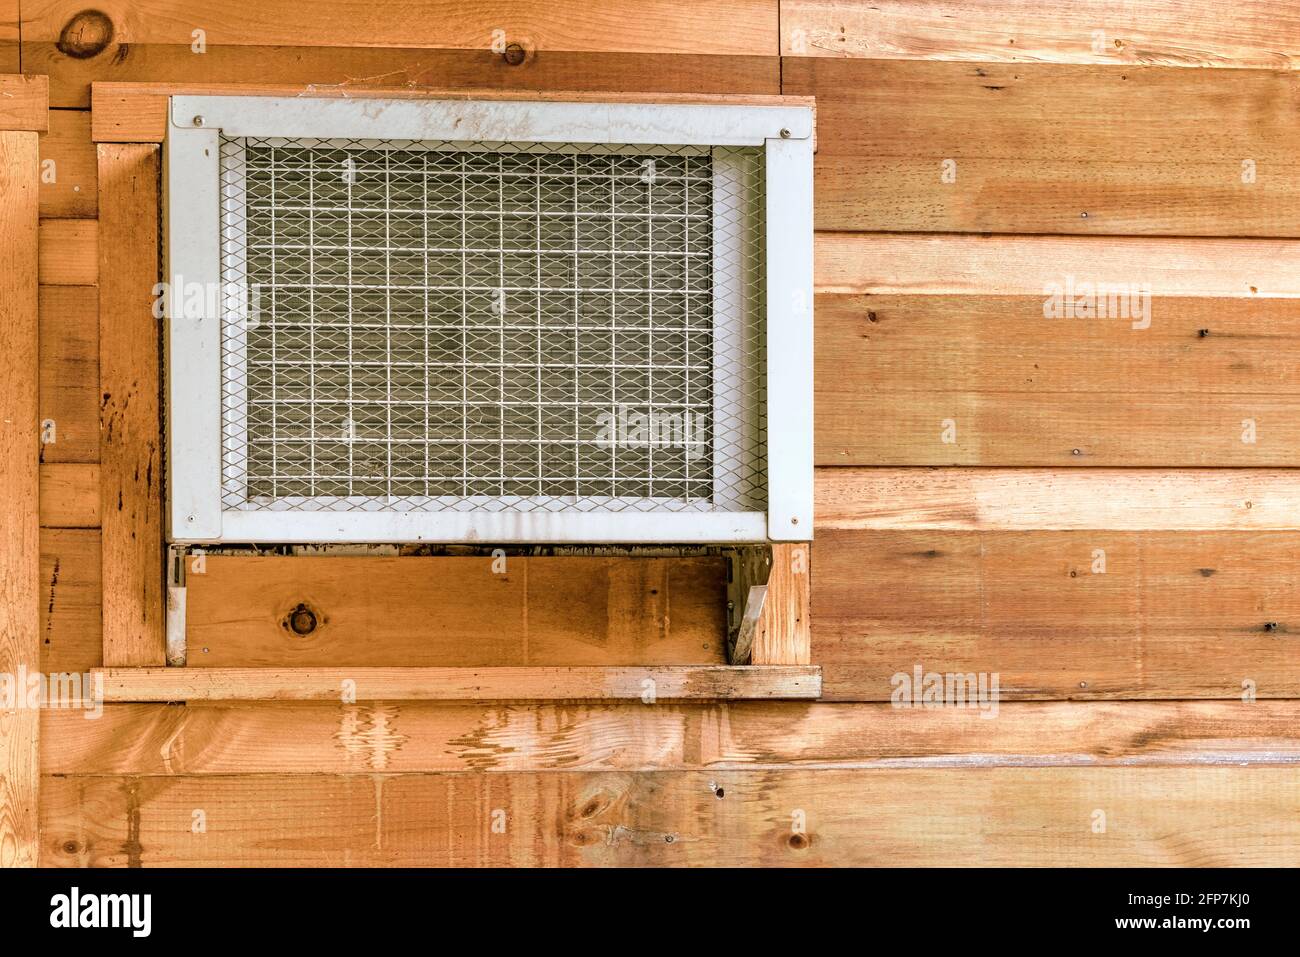 Horizontal shot of a window air conditioner unit in a wooden wall with copy space. Stock Photo